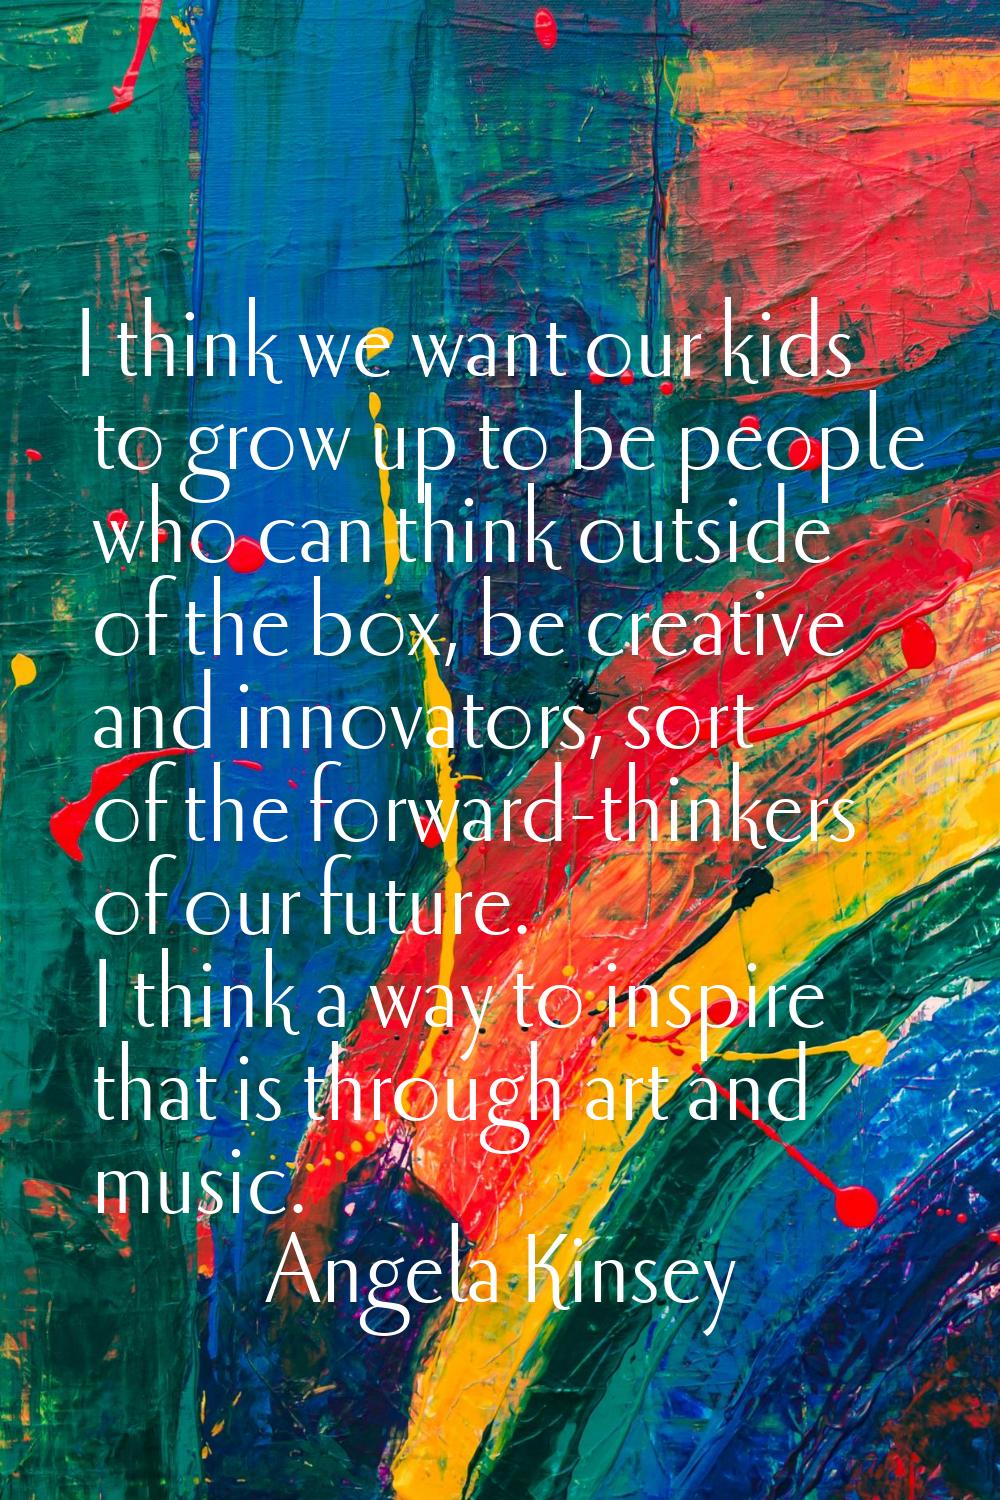 I think we want our kids to grow up to be people who can think outside of the box, be creative and 